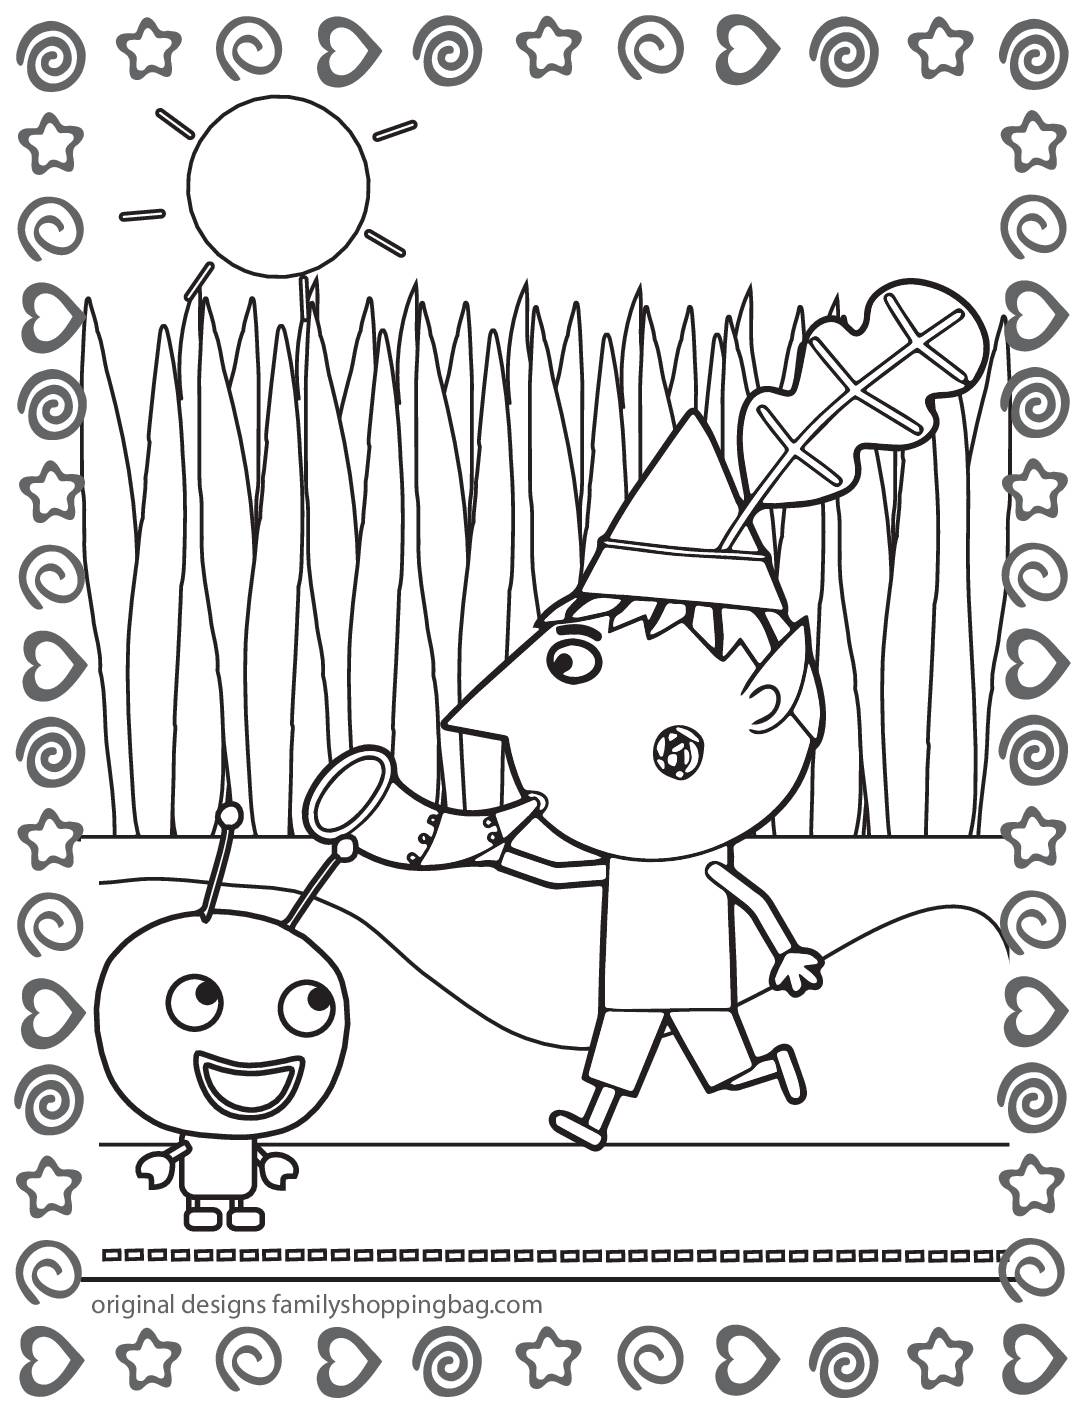 Coloring Page 5 Ben & Holly